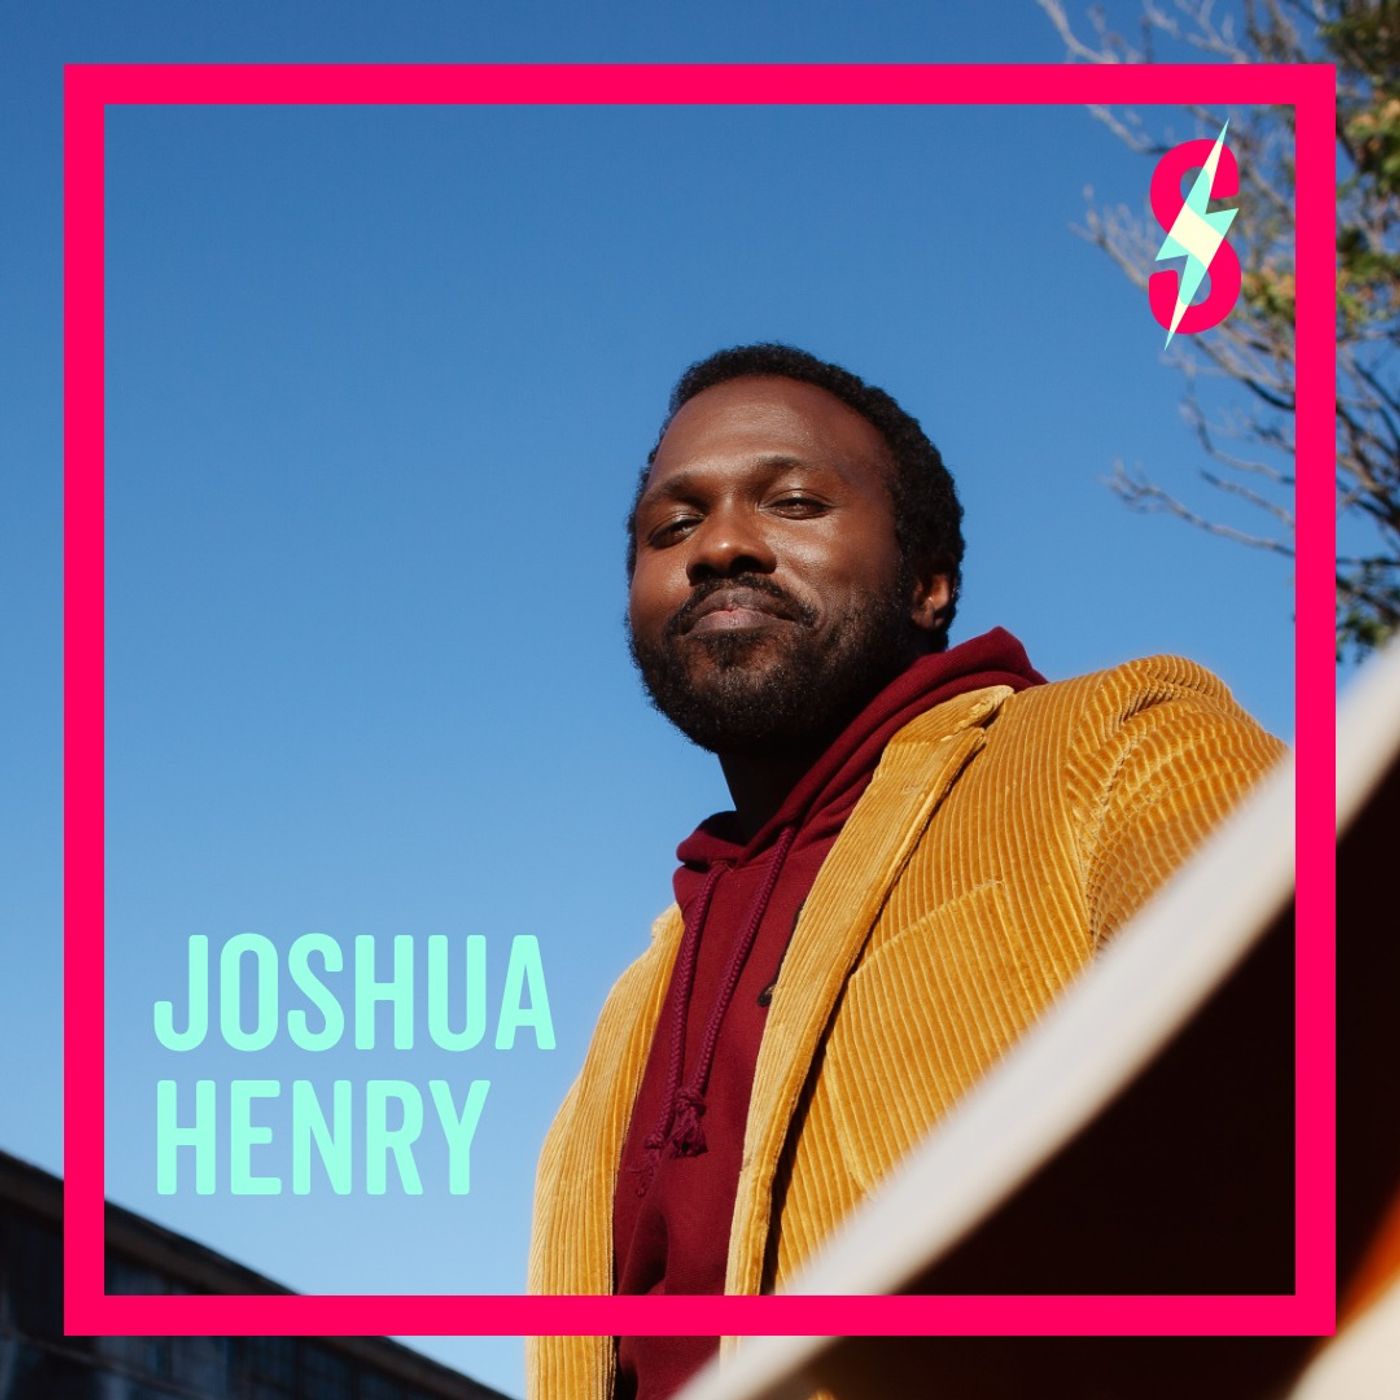 Joshua Henry's Spark Is Brown Sugar: Gospel, Soul And The Making Of A Classic